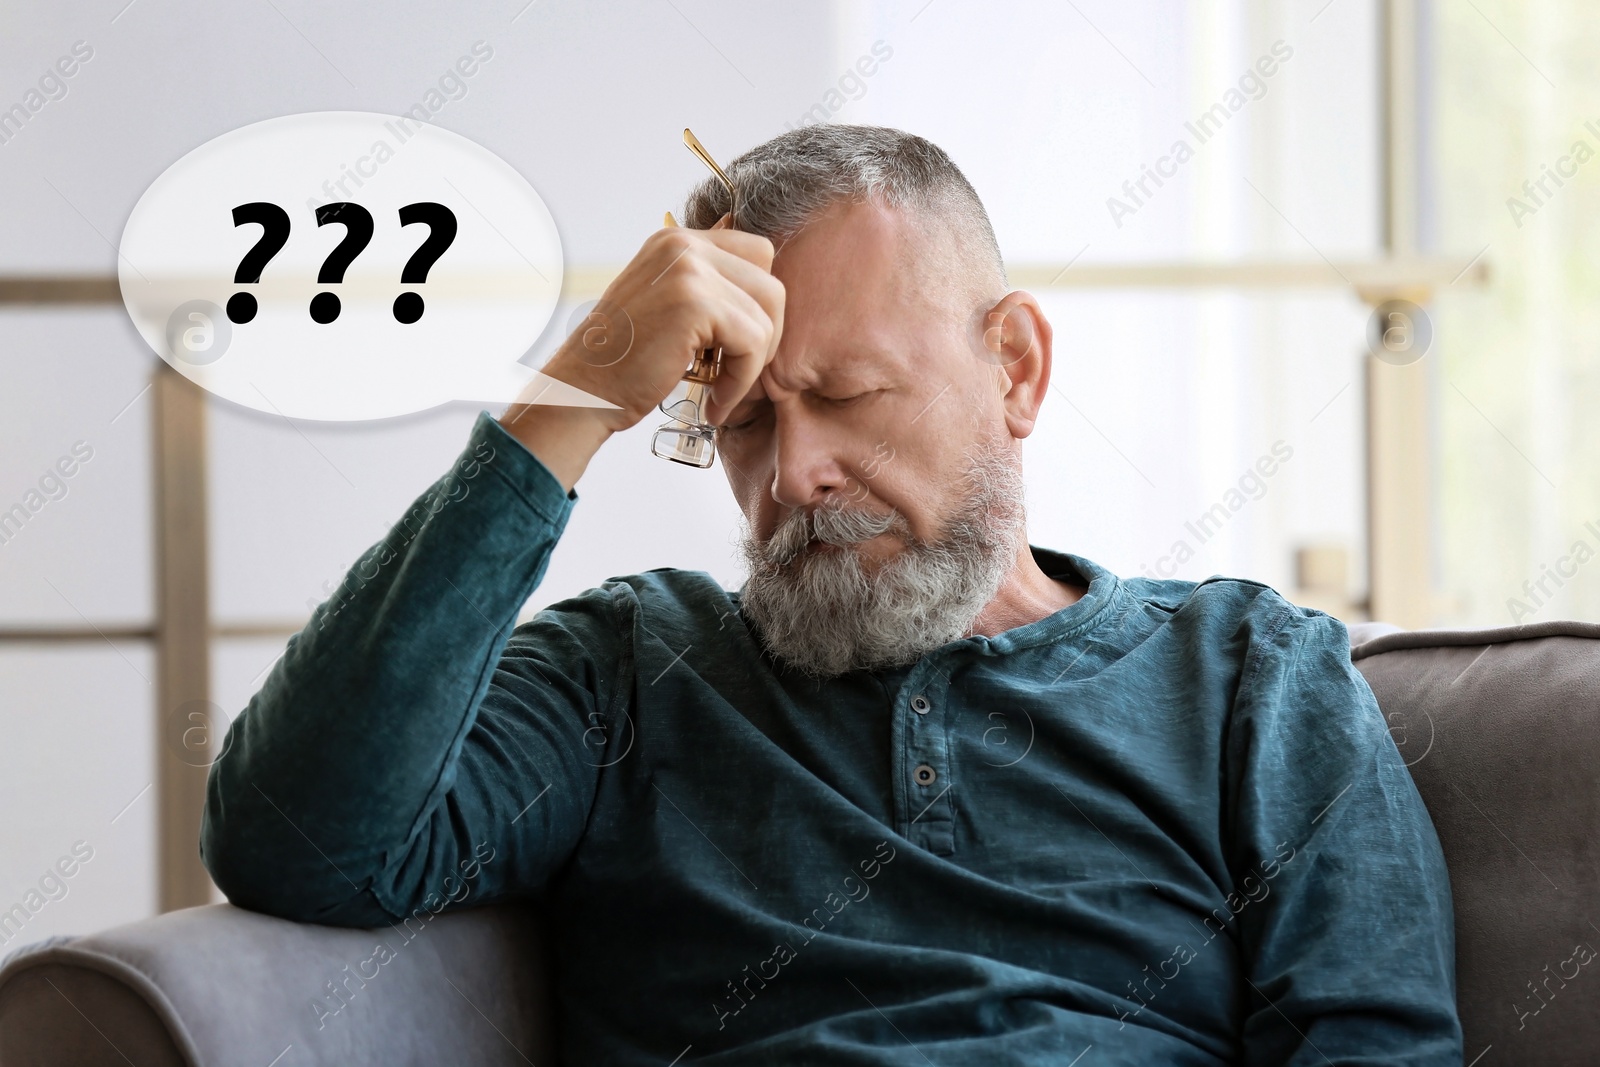 Image of Senior man suffering from dementia at home. Illustration of speech bubble with question marks